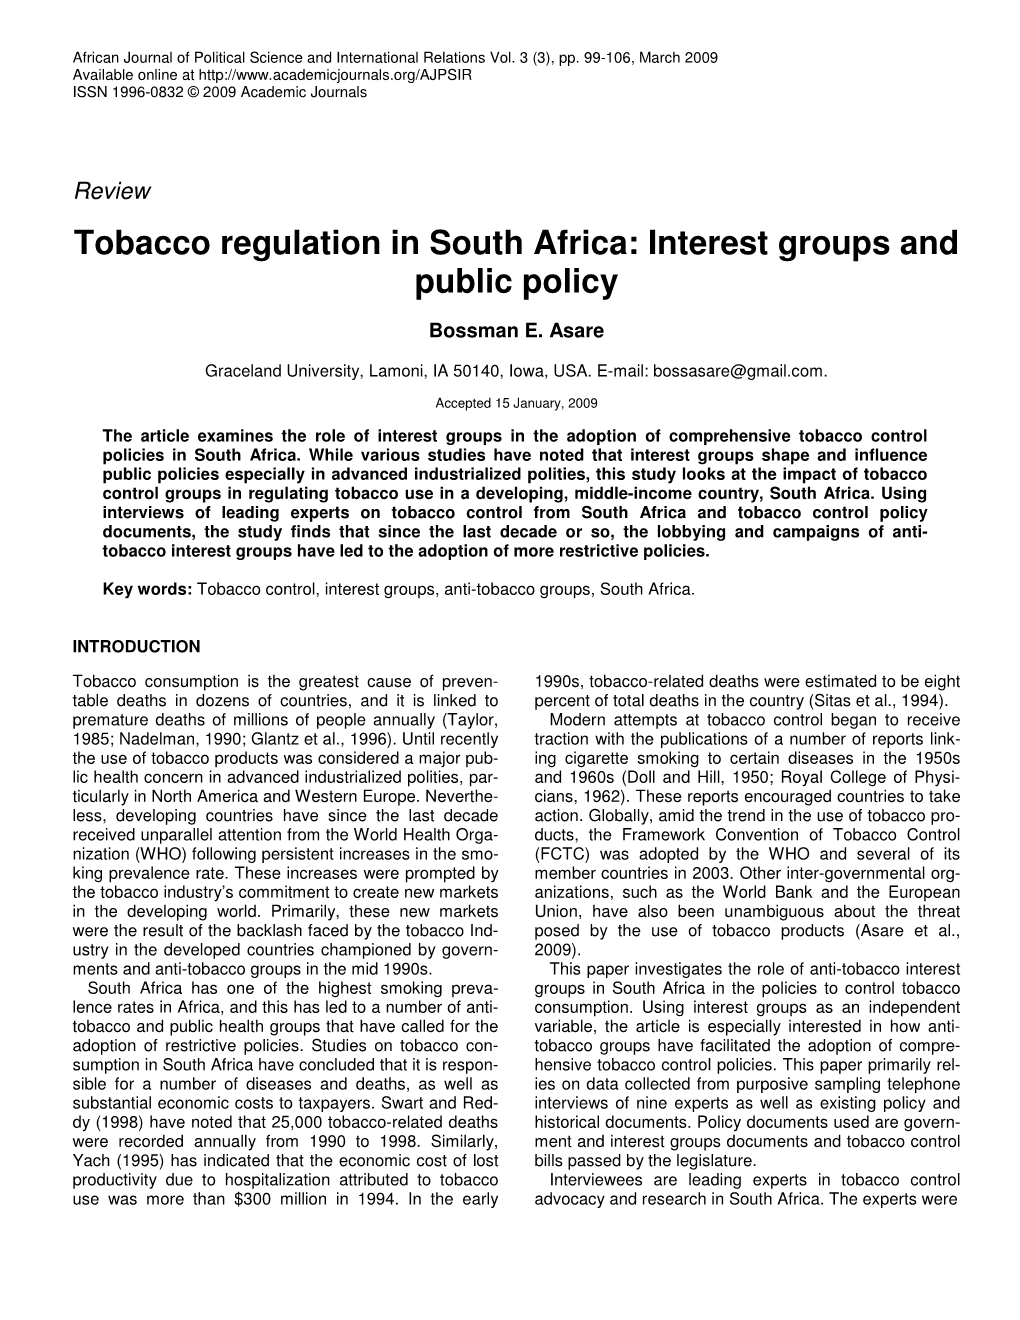 Tobacco Regulation in South Africa: Interest Groups and Public Policy